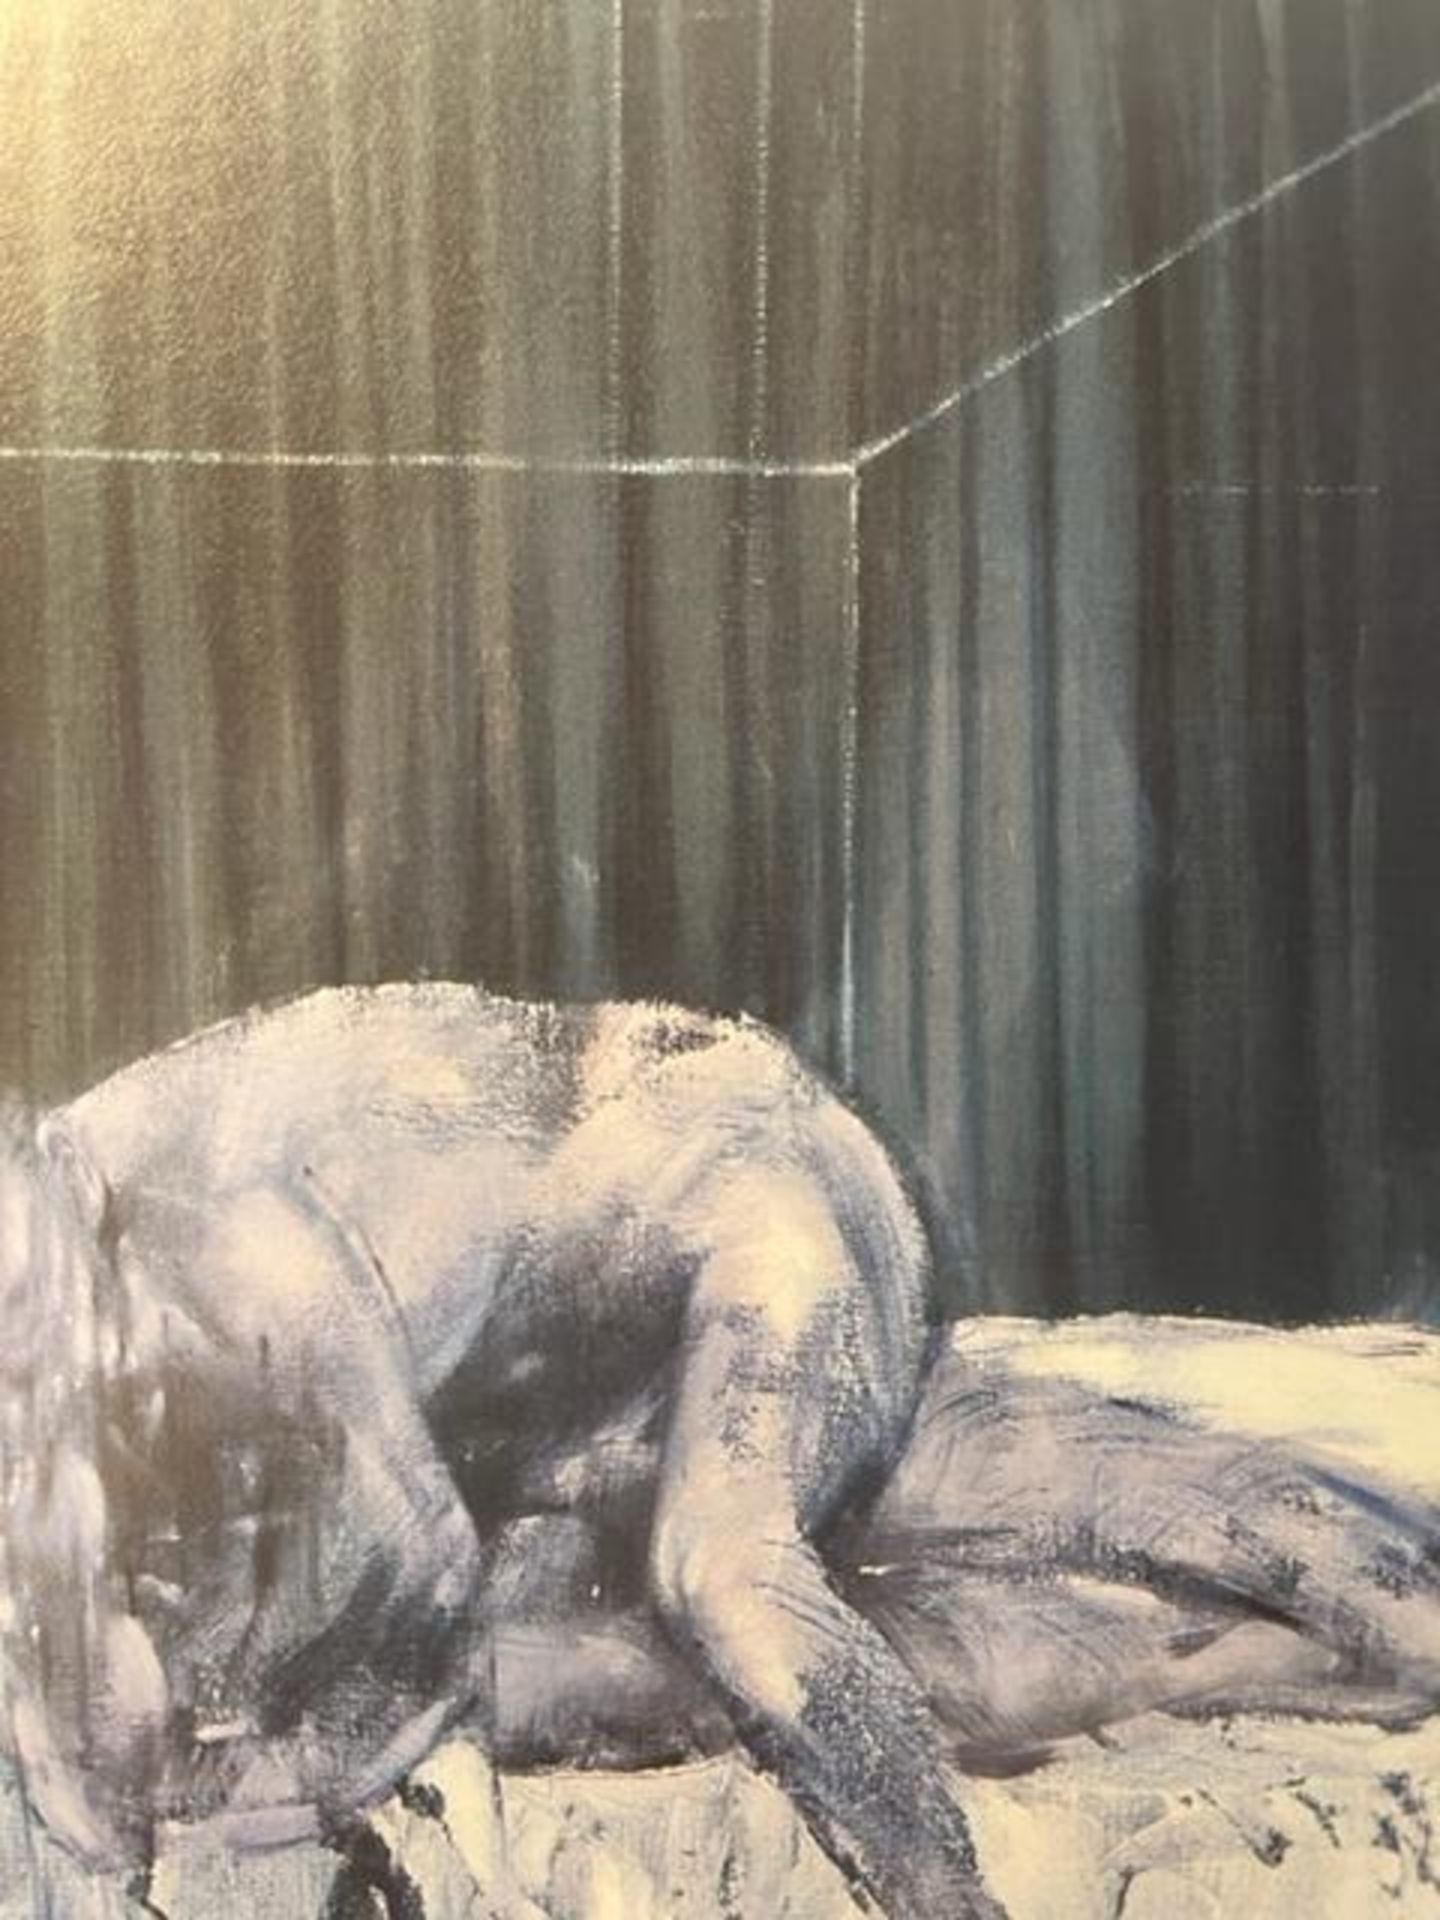 Francis Bacon "Two Figures" Print. - Image 2 of 6